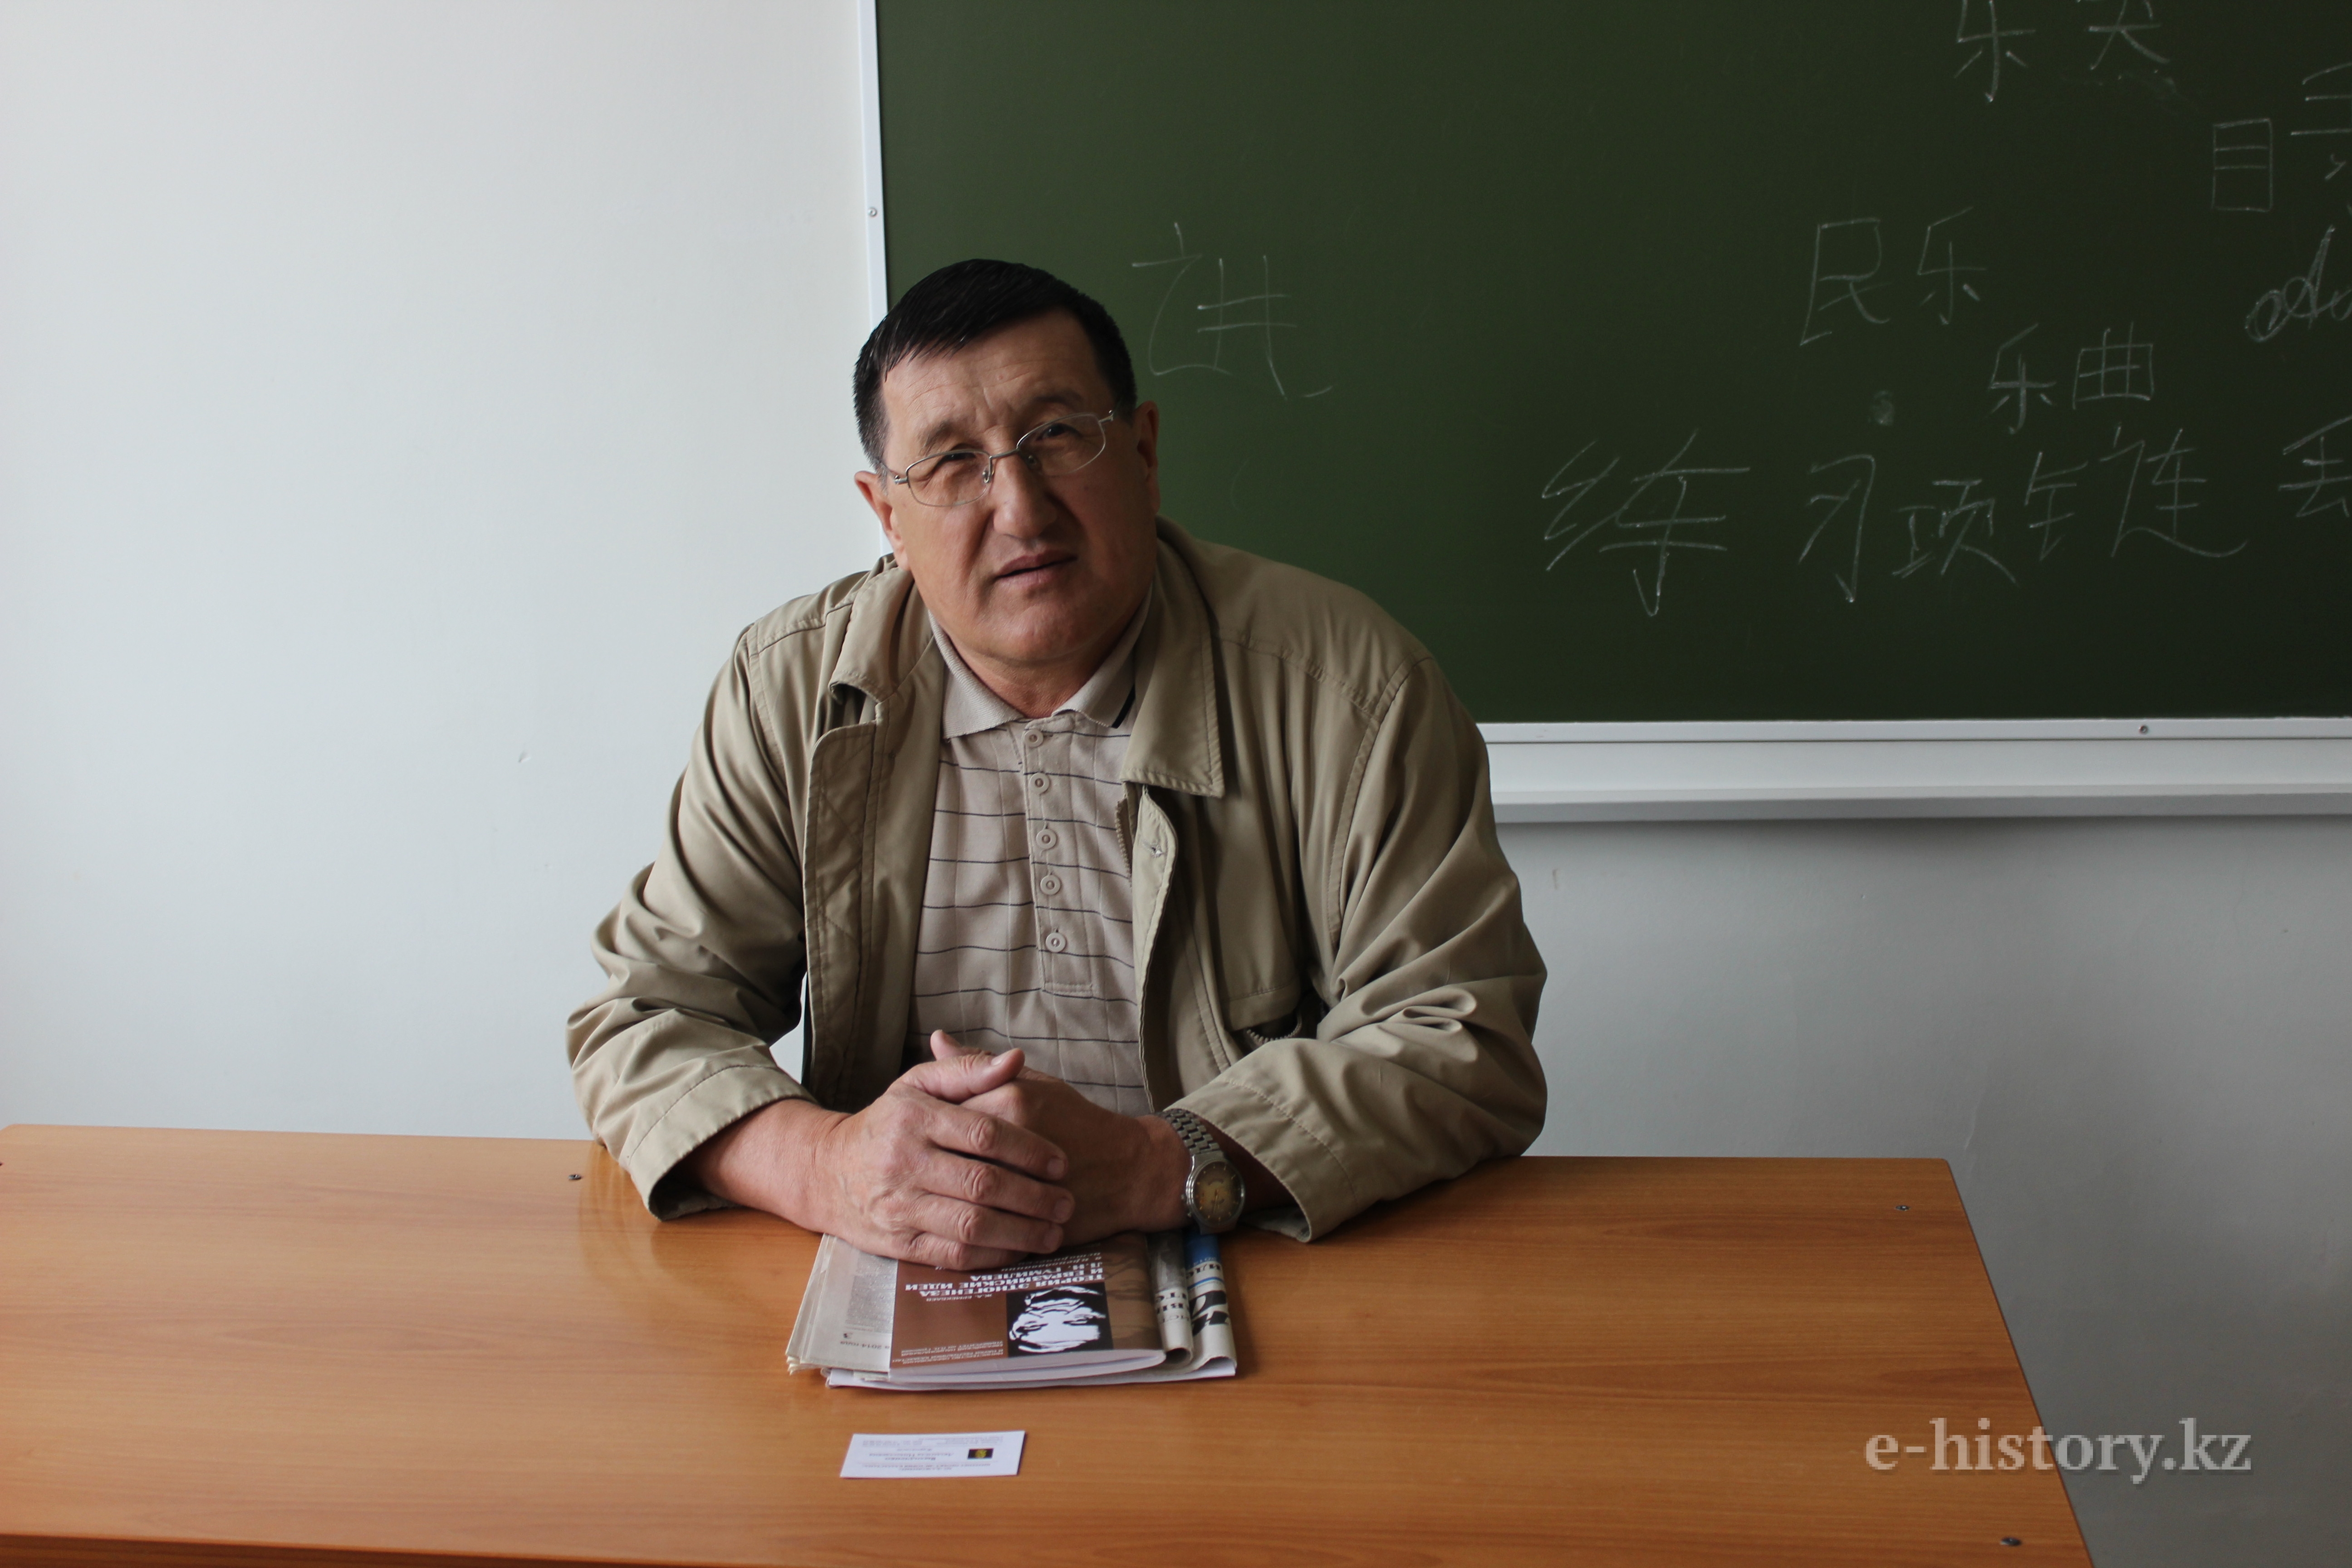 “Eurasianism is everywhere, even in everyday life”. Interview with Zh. Yermekbayev